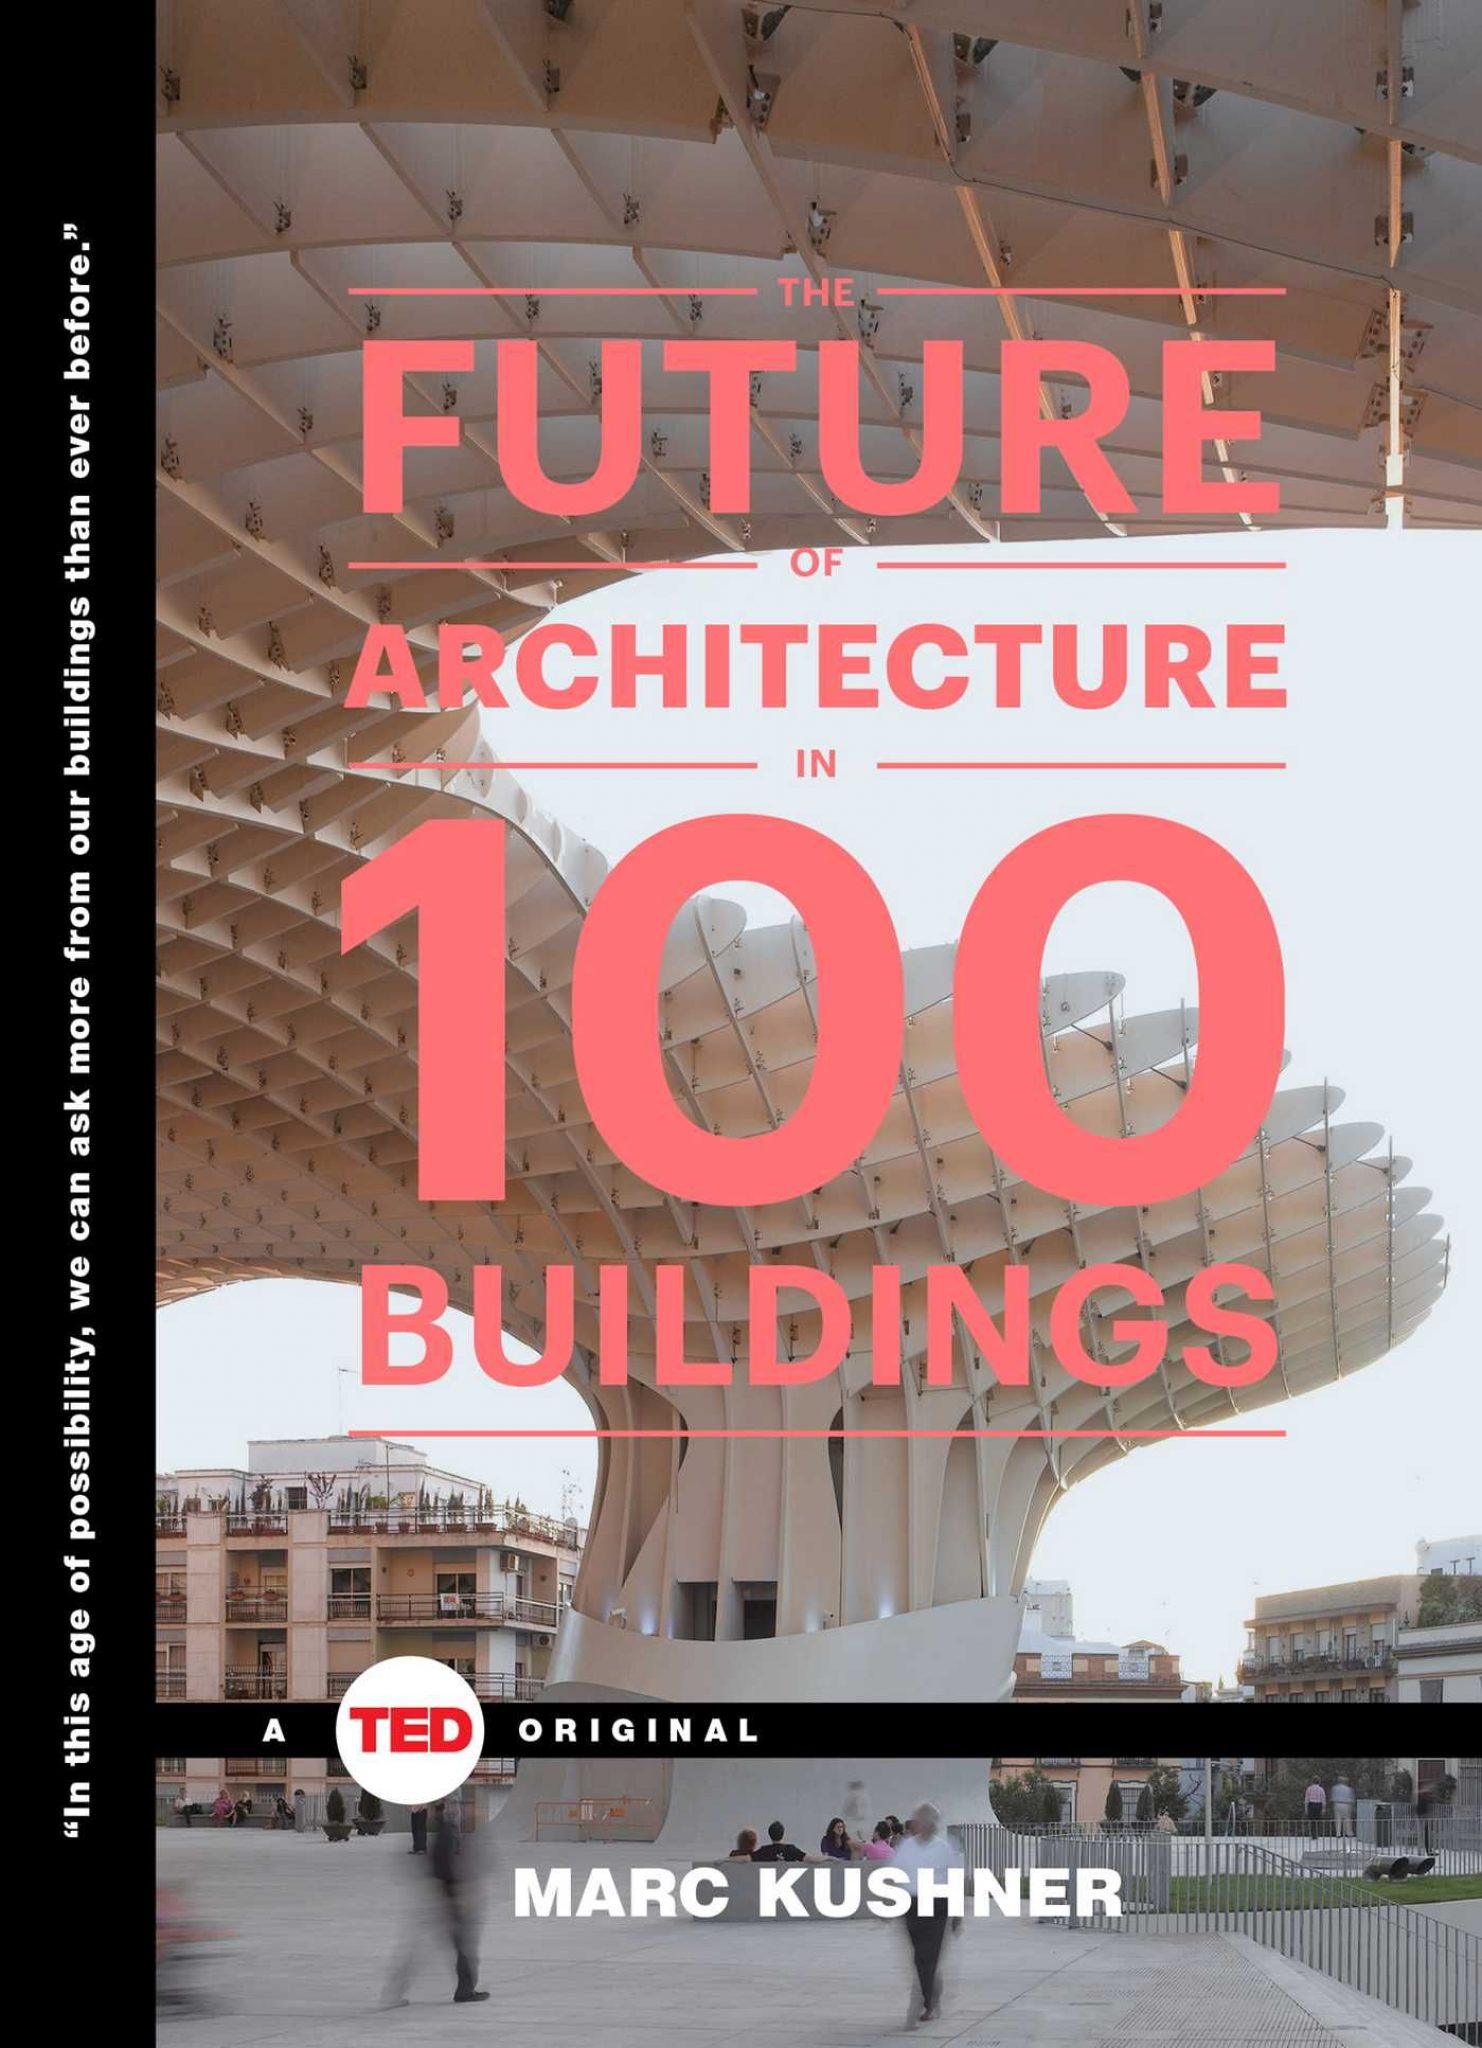 research books on architecture